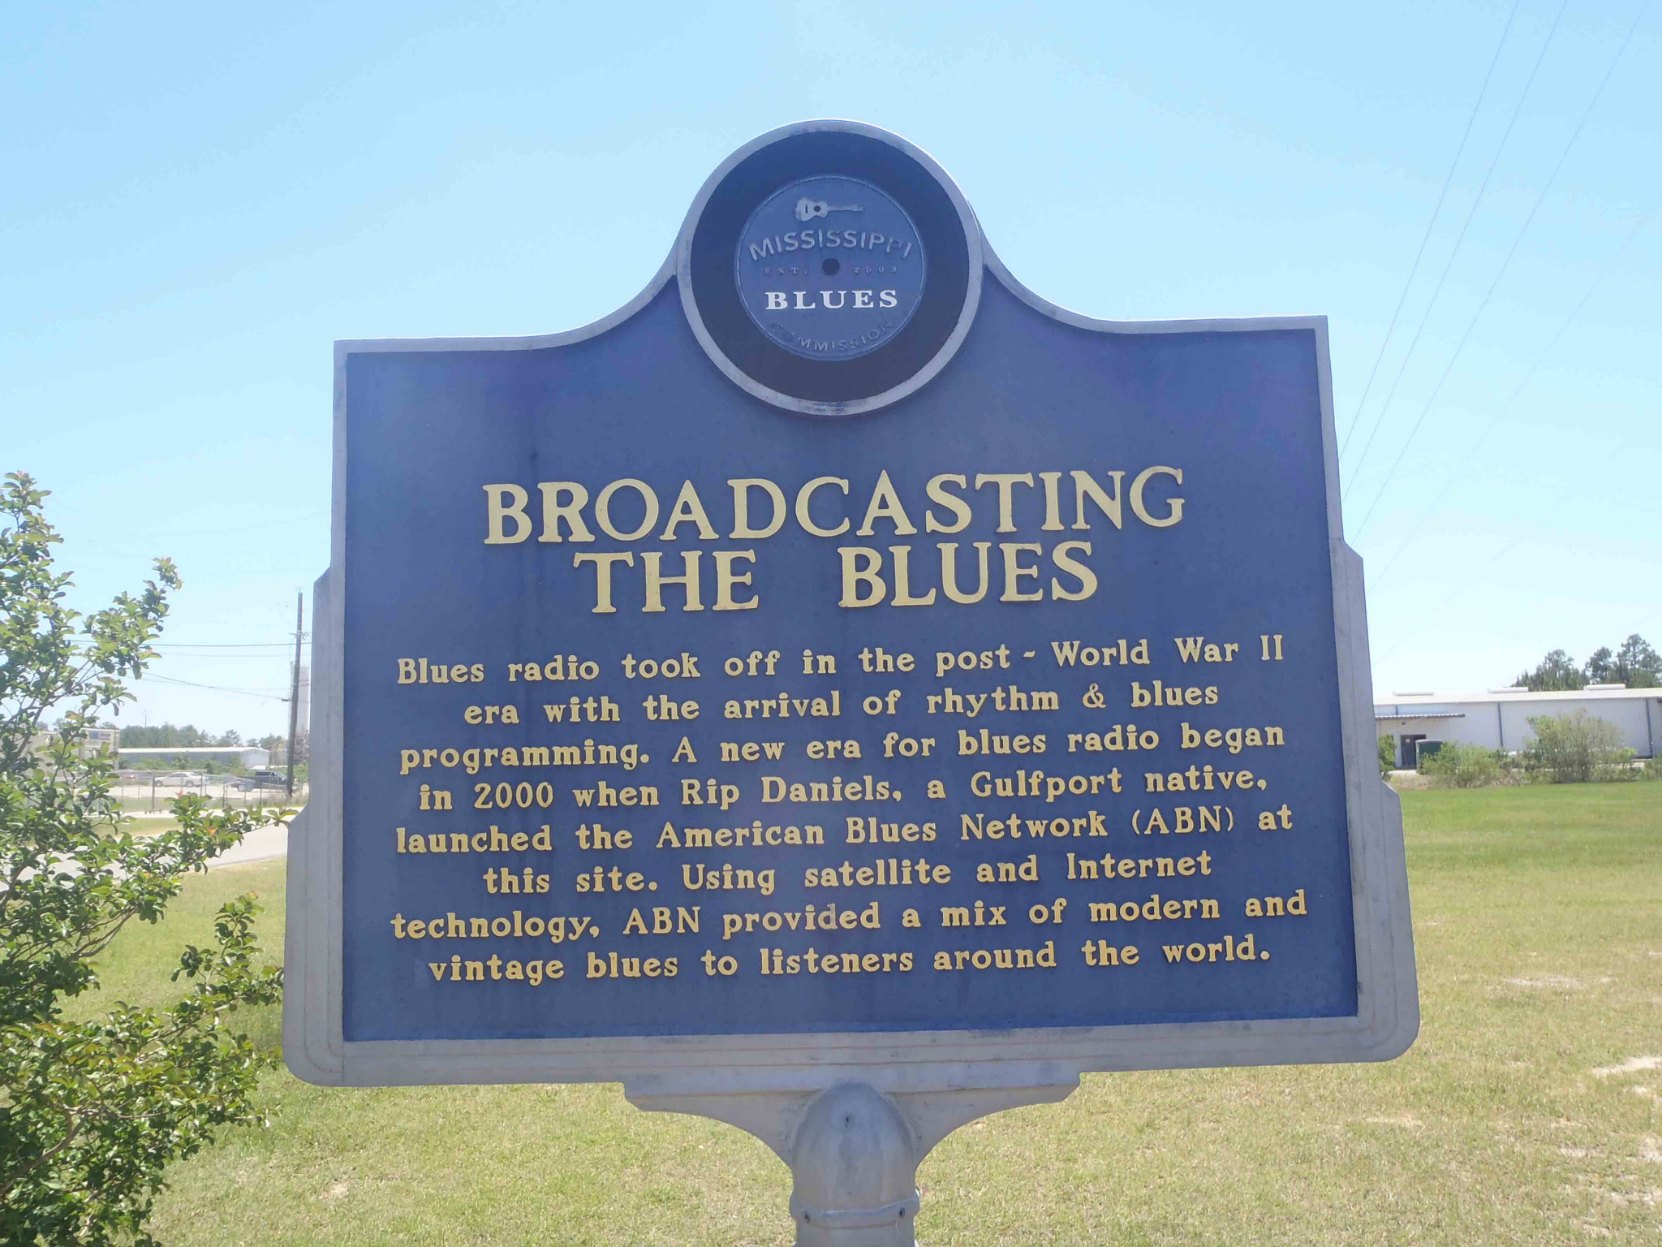 Mississippi Blues Trail marker for Broadcasting The Blues, Gulfport, Mississippi.